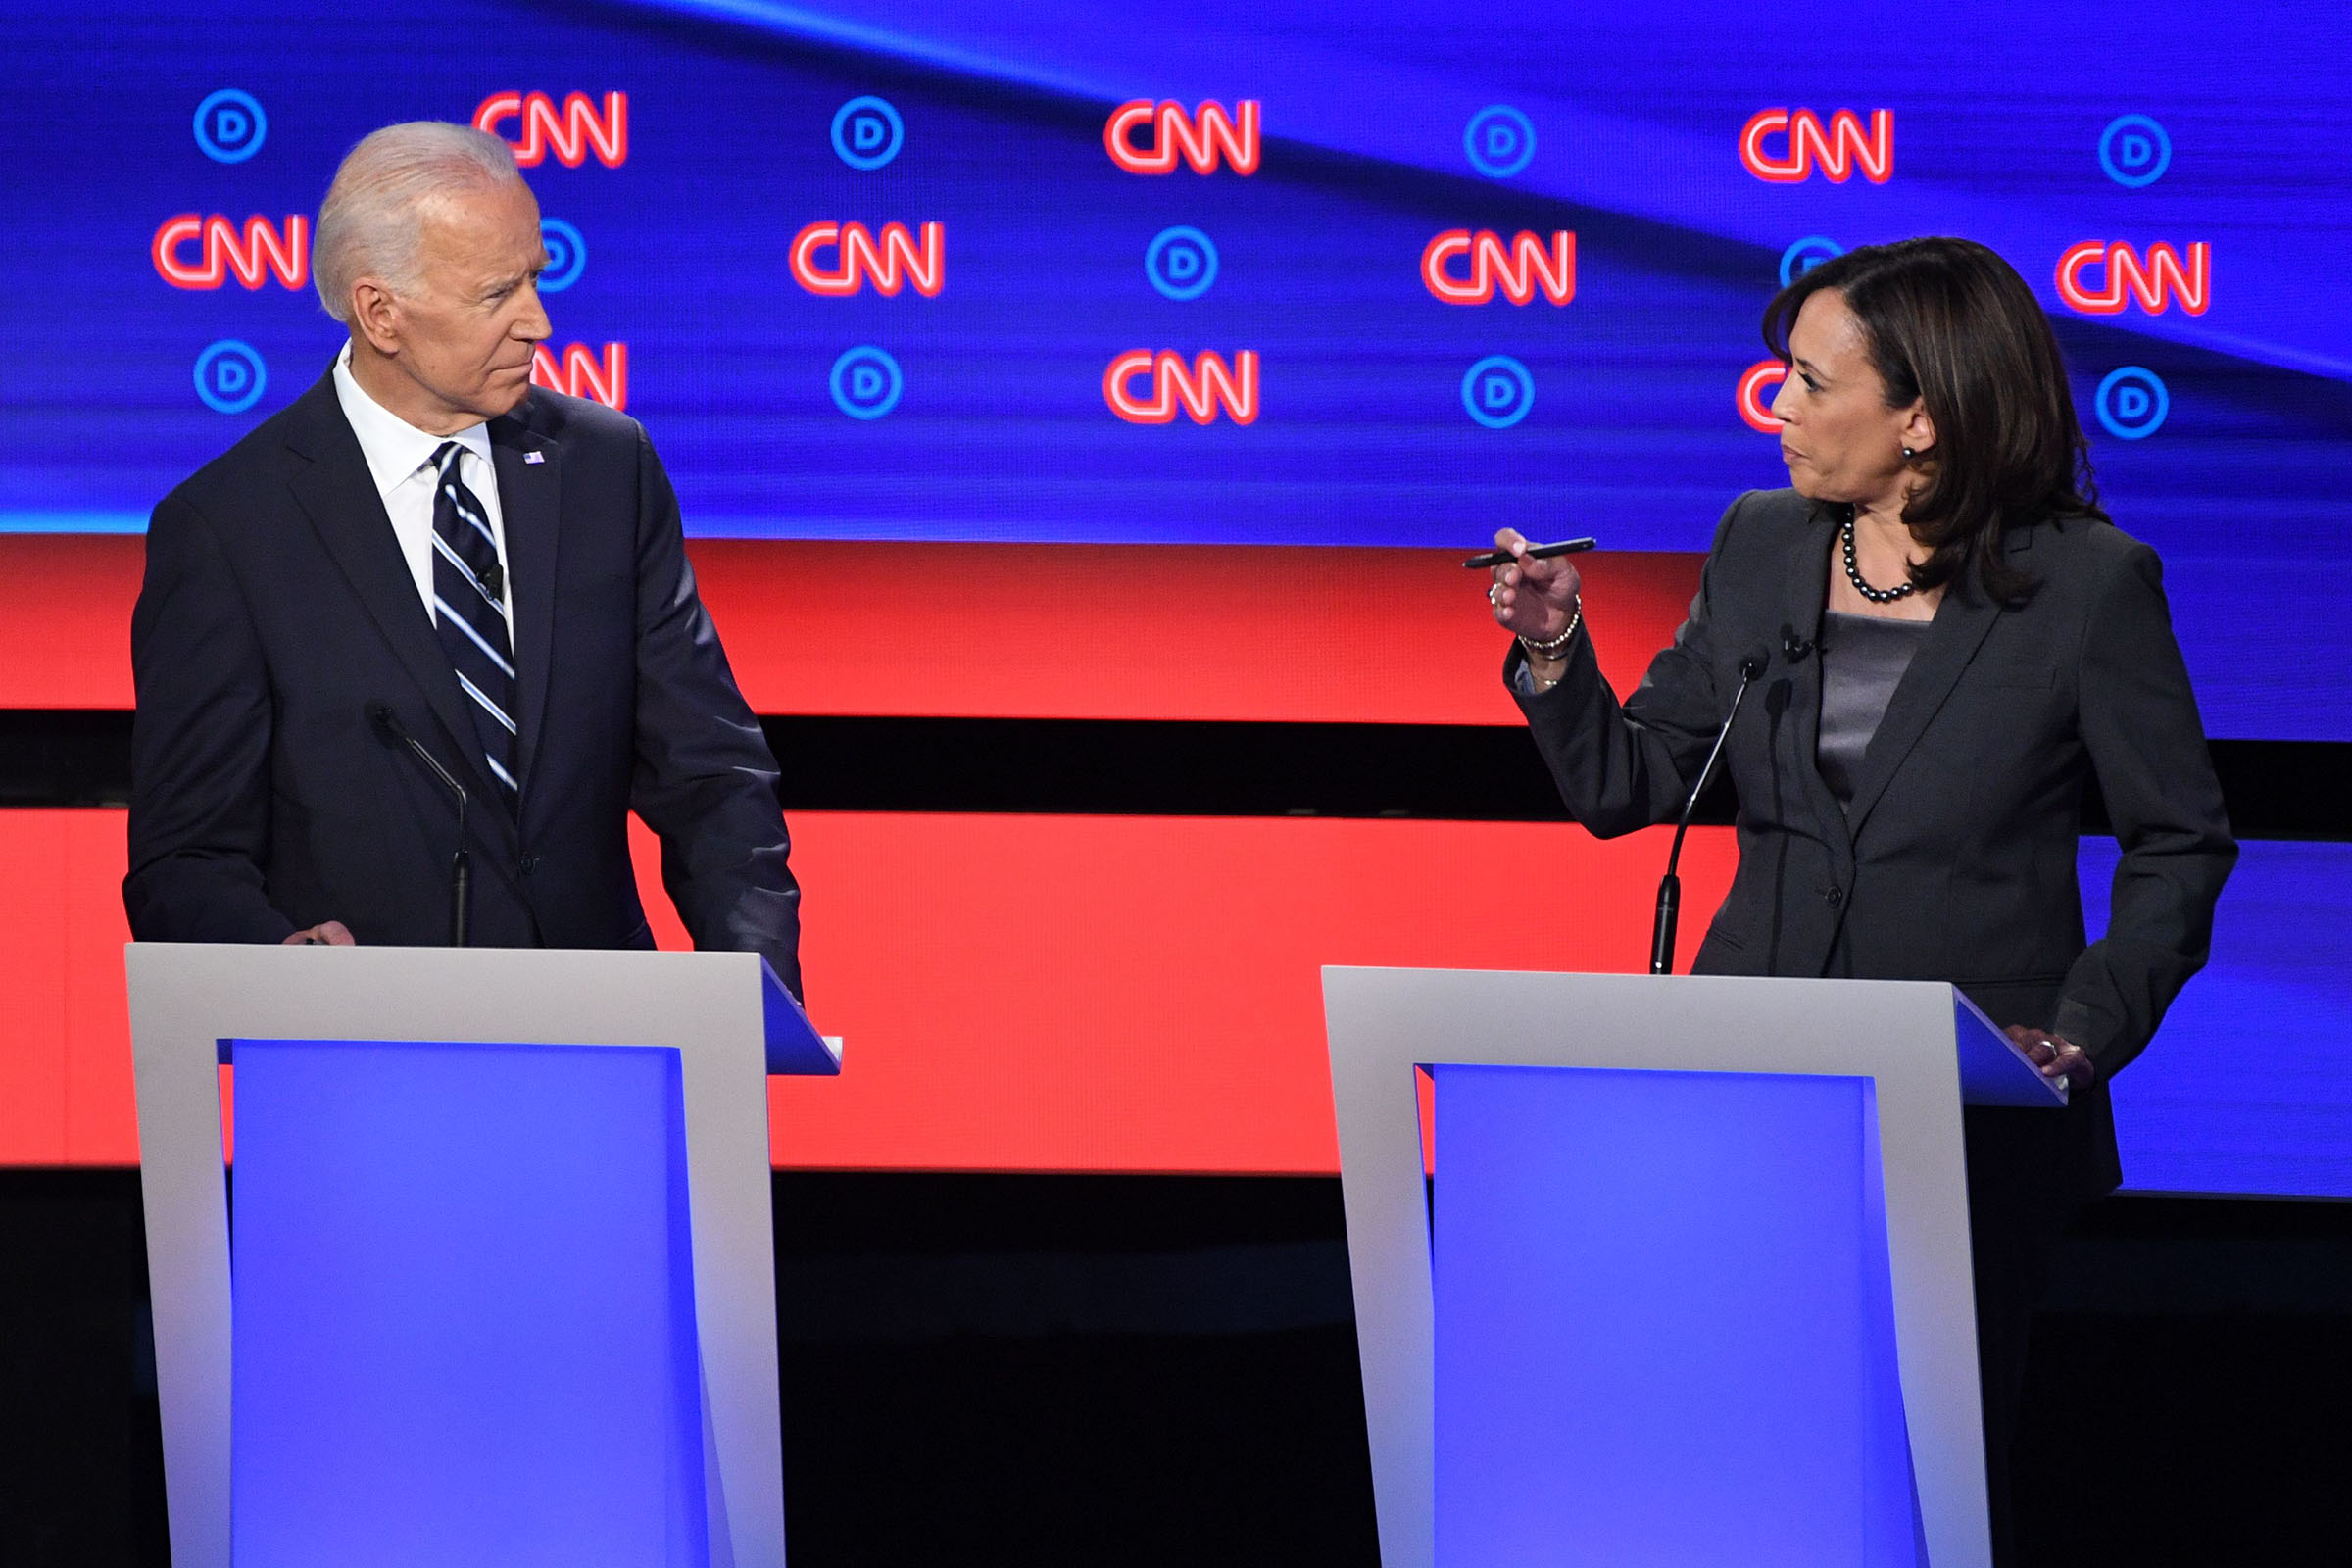 Democratic presidential hopefuls Former Vice President Joe Biden and US Senator from California Kamala Harris speak during the second round of the second Democratic primary debate of the 2020 presidential campaign season hosted by CNN at the Fox Theatre in Detroit, Michigan on July 31, 2019. (Jim Watson—AFP/Getty Images)